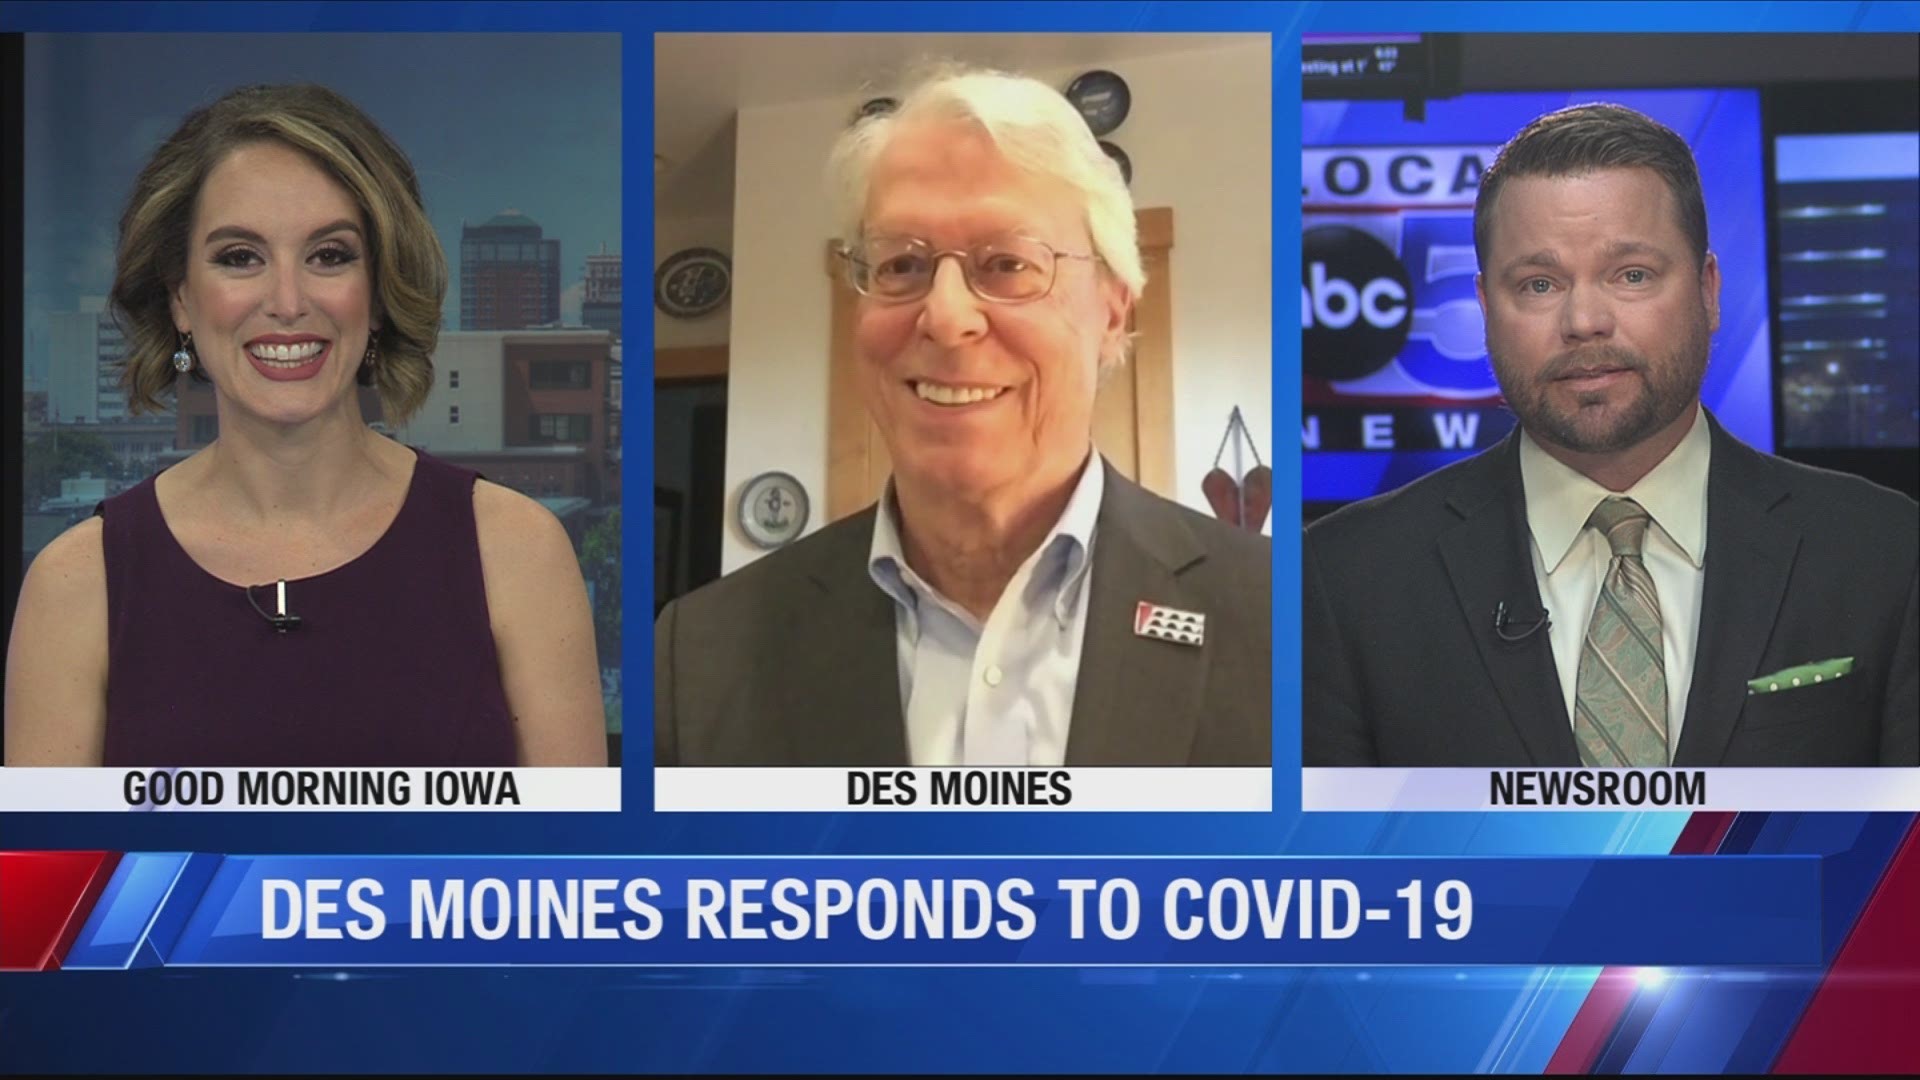 Des Moines Mayor Frank Cownie joins us on Good Morning Iowa after extending closures due to COVID-19.